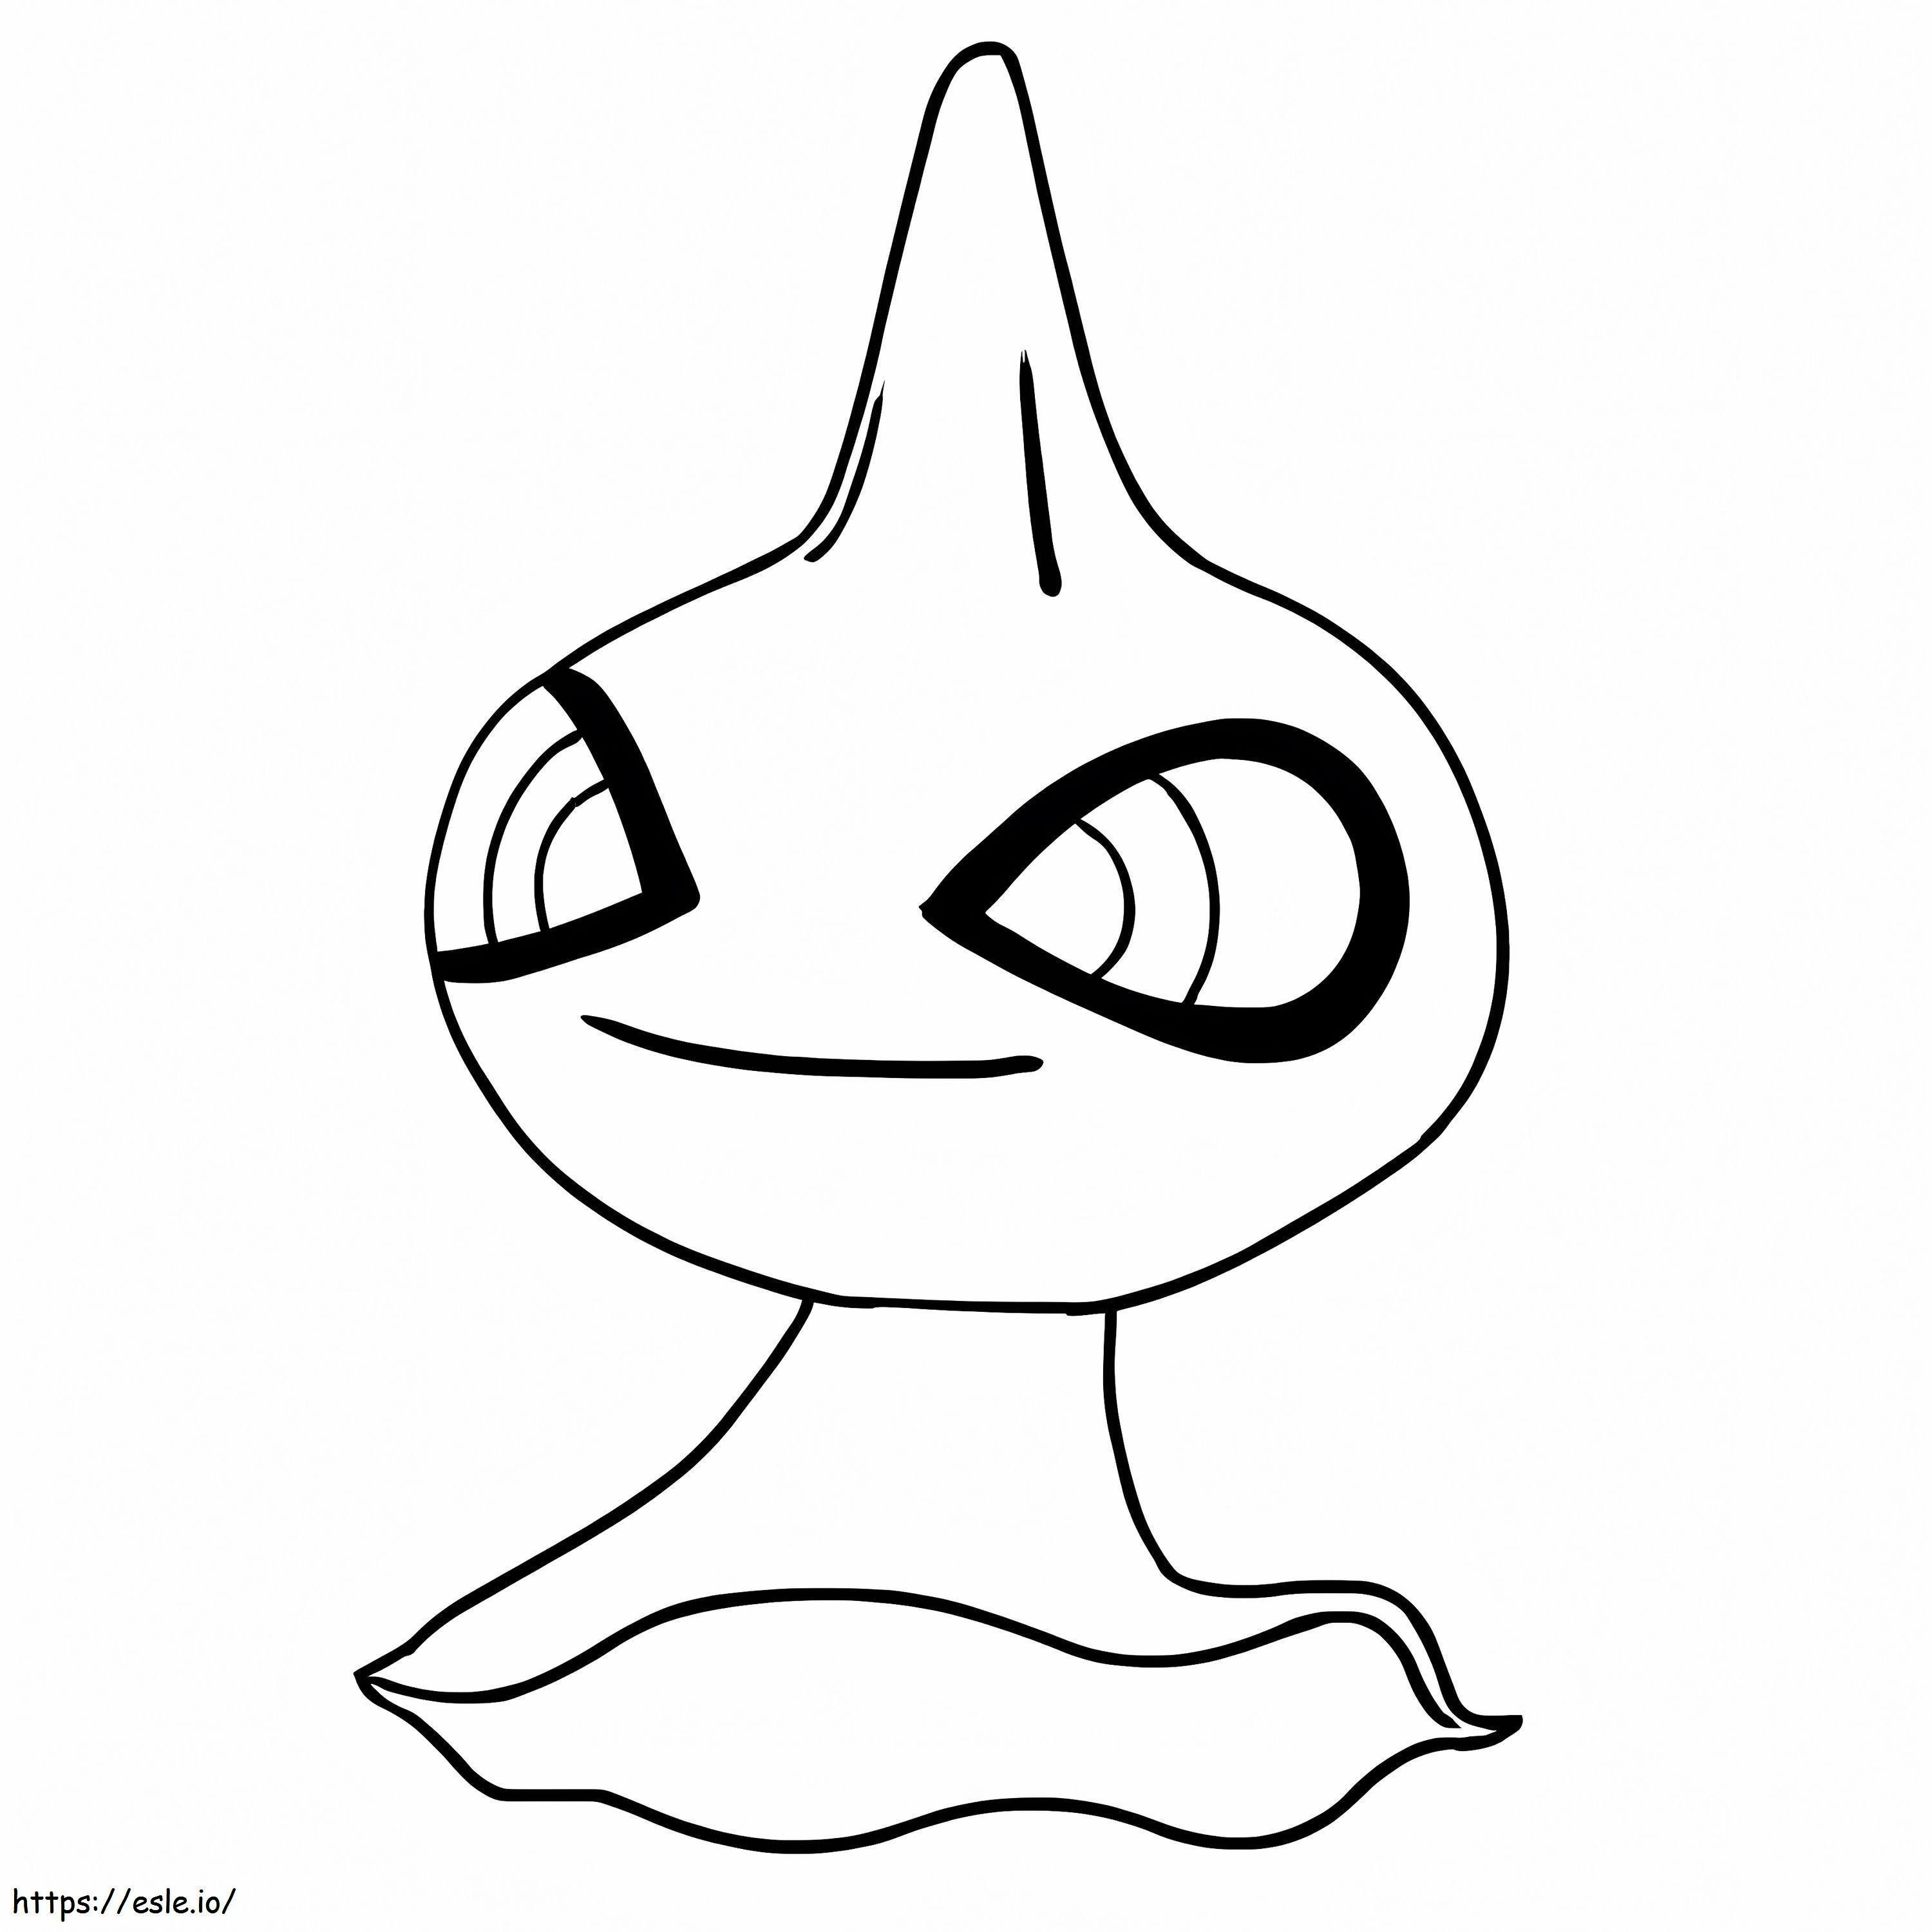 Shuppet coloring page